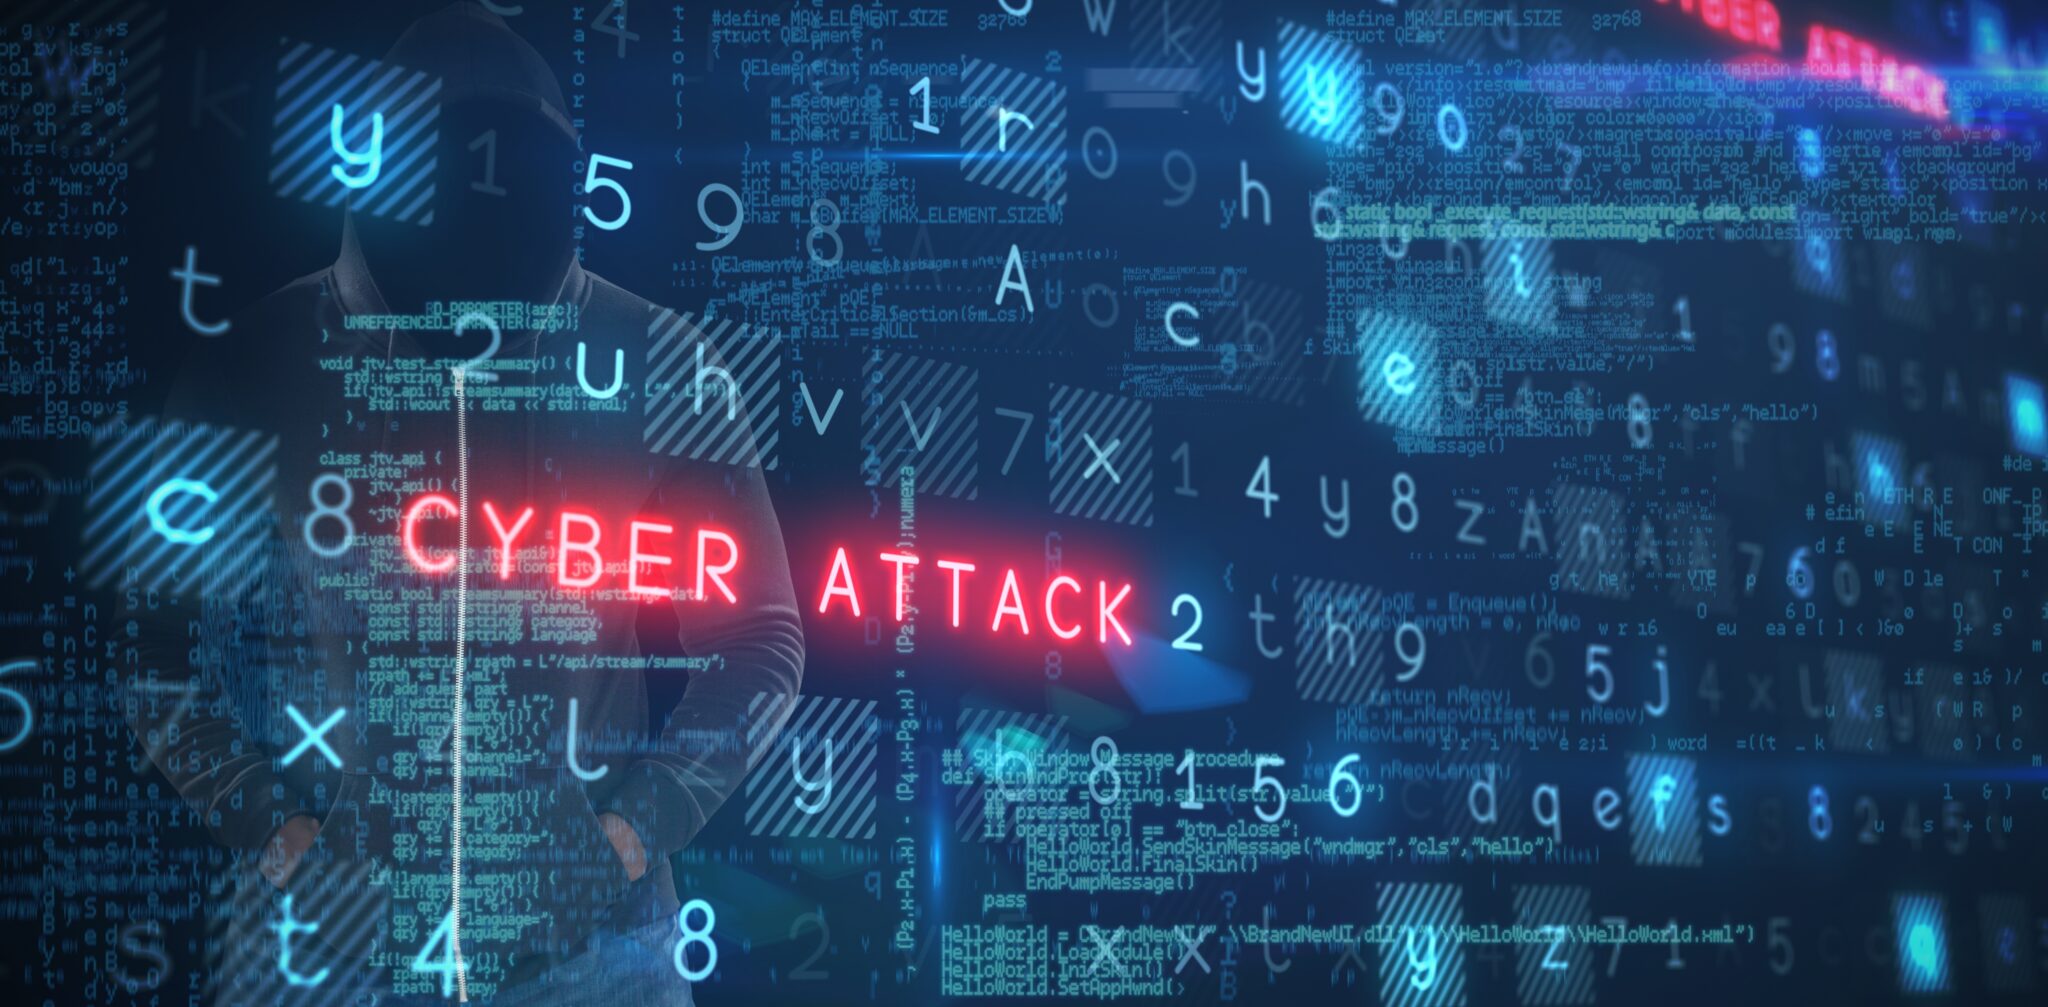 4 Things Small Businesses Can Do to Protect Against Cyberattacks